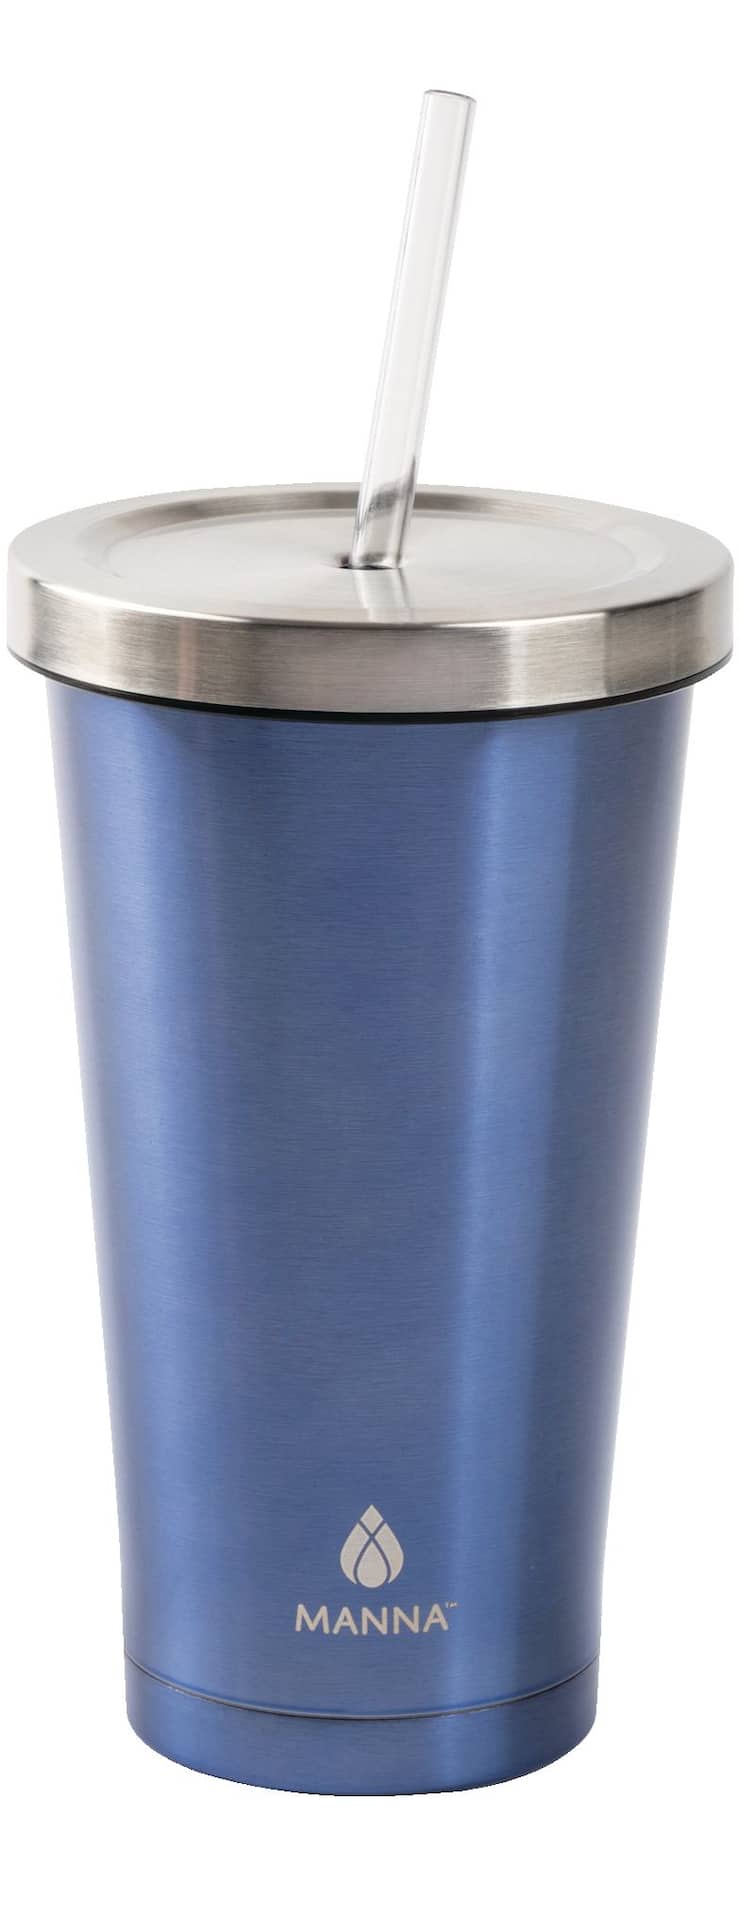 Wet Tumbler, Including 2kg Stainless Pins & Shipping